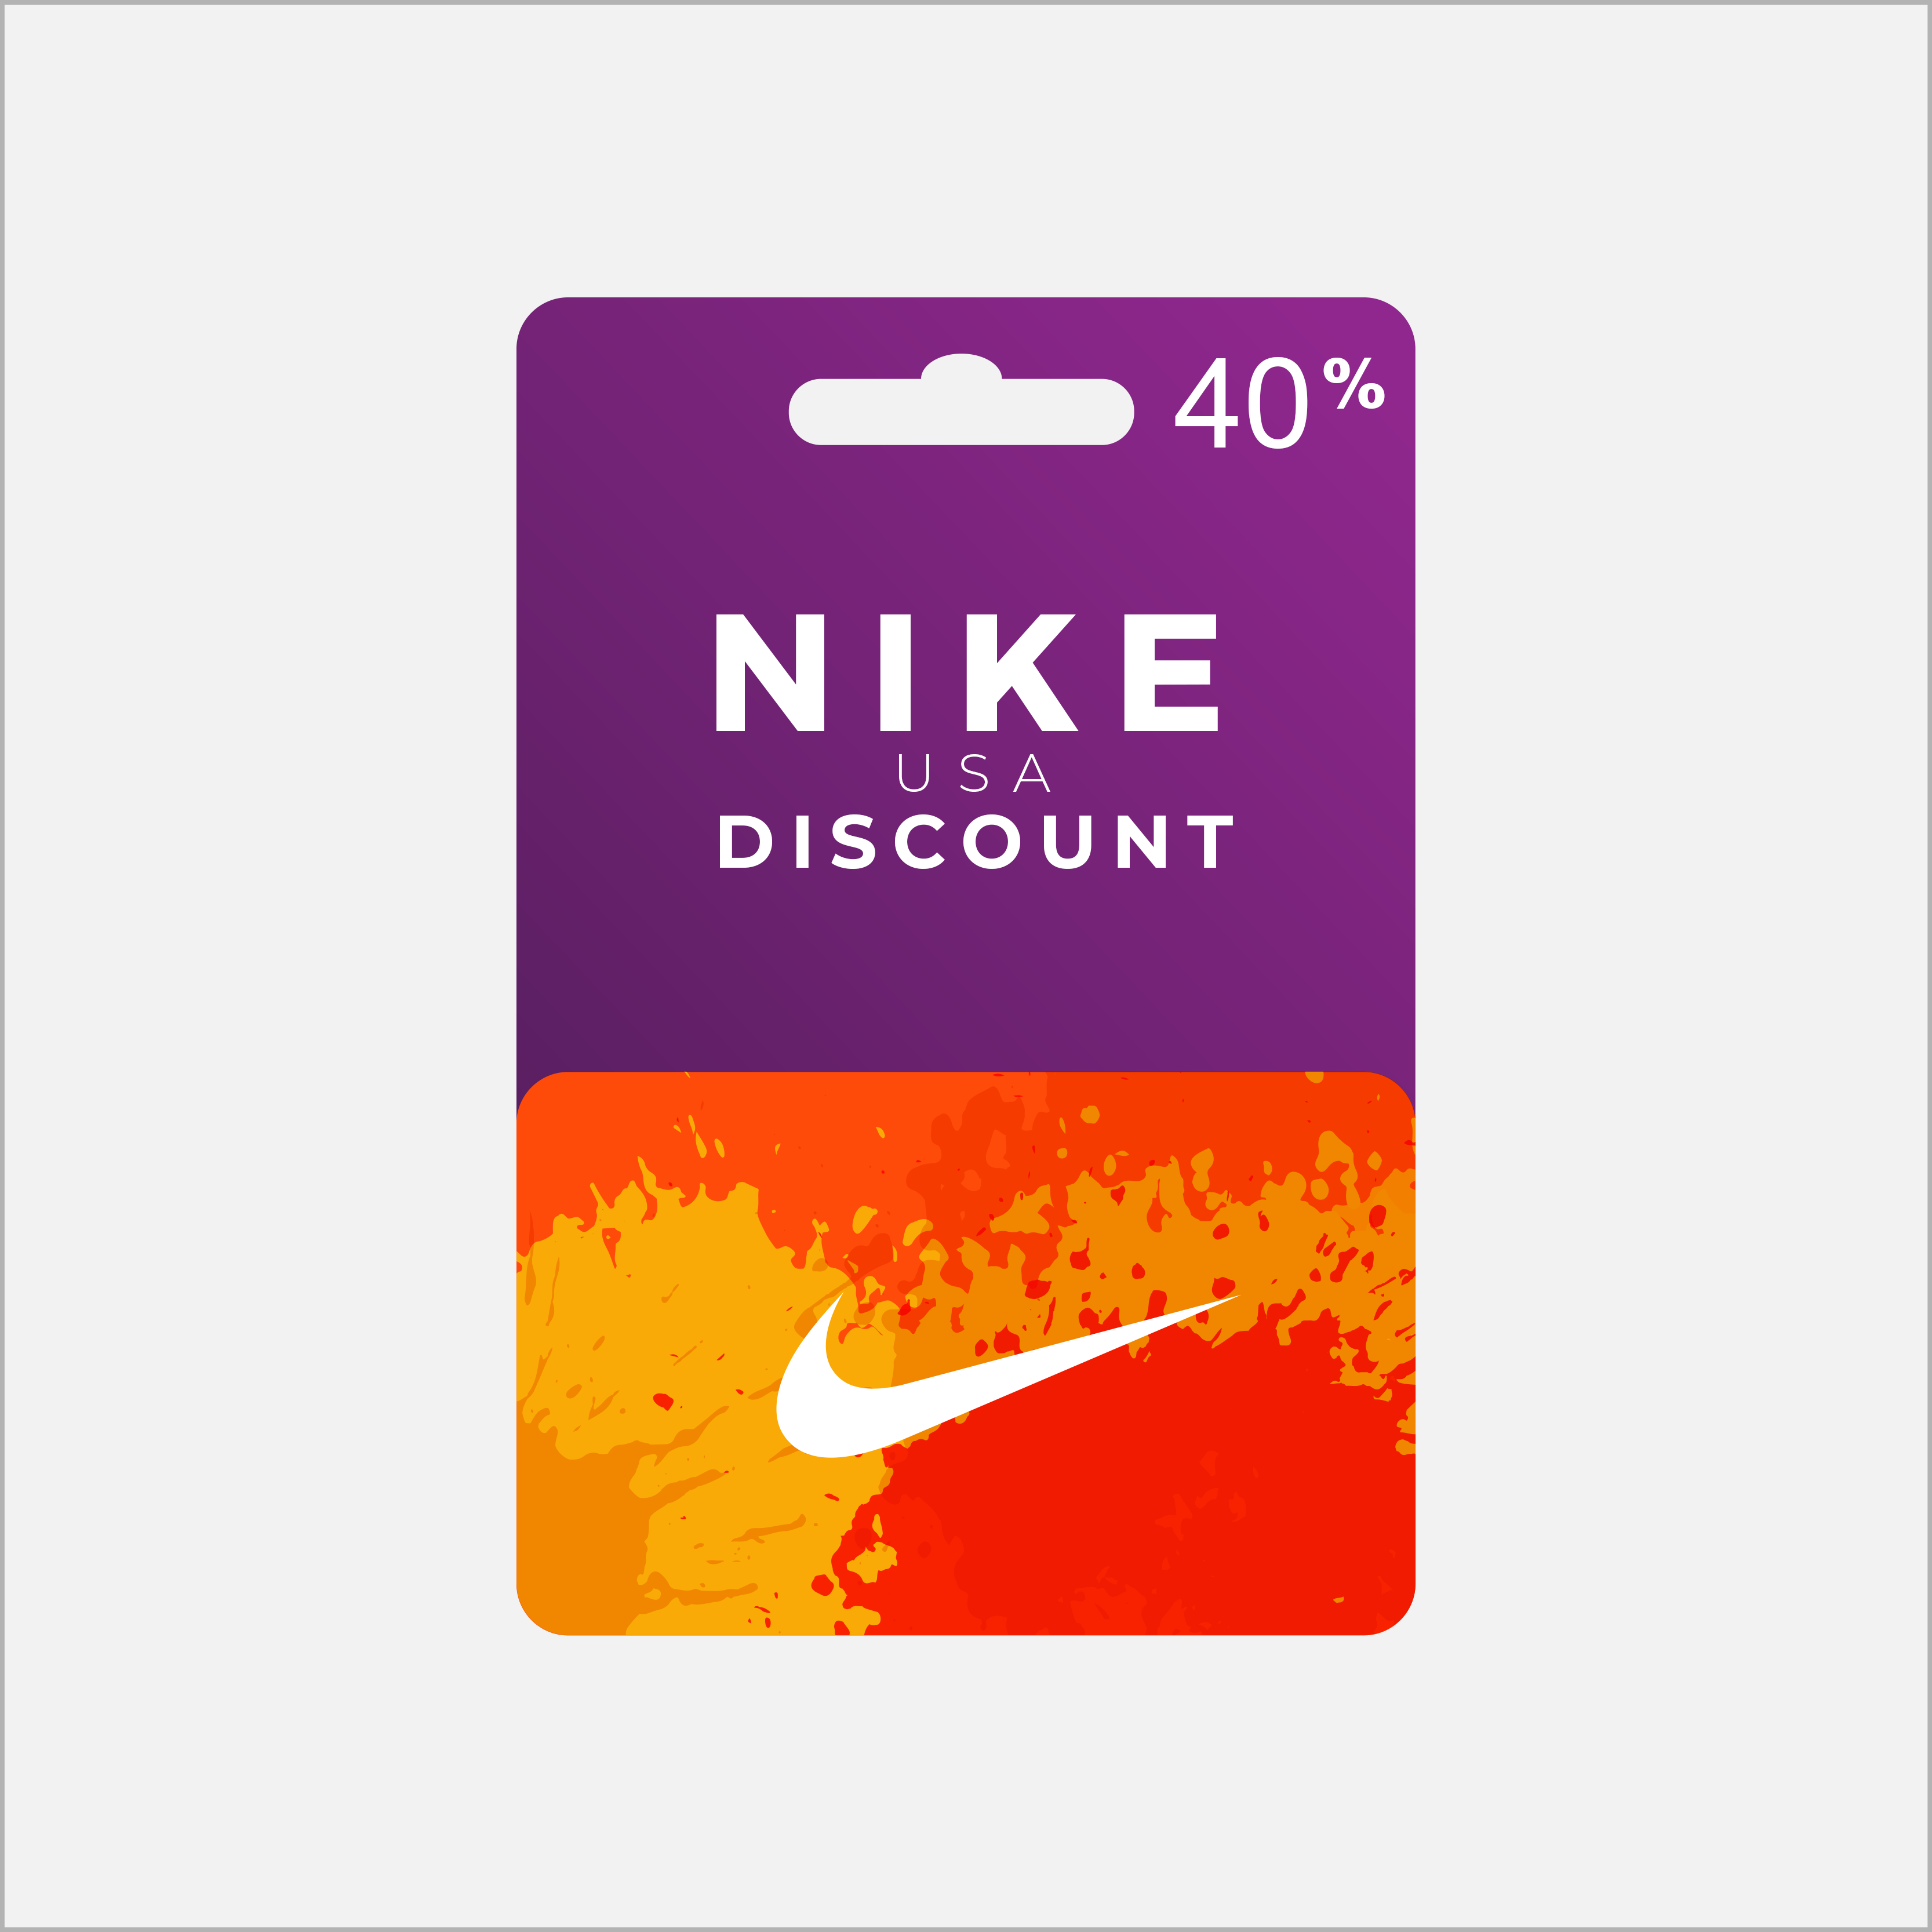 Nike USA Voucher 40 Off Nike Discount Codes